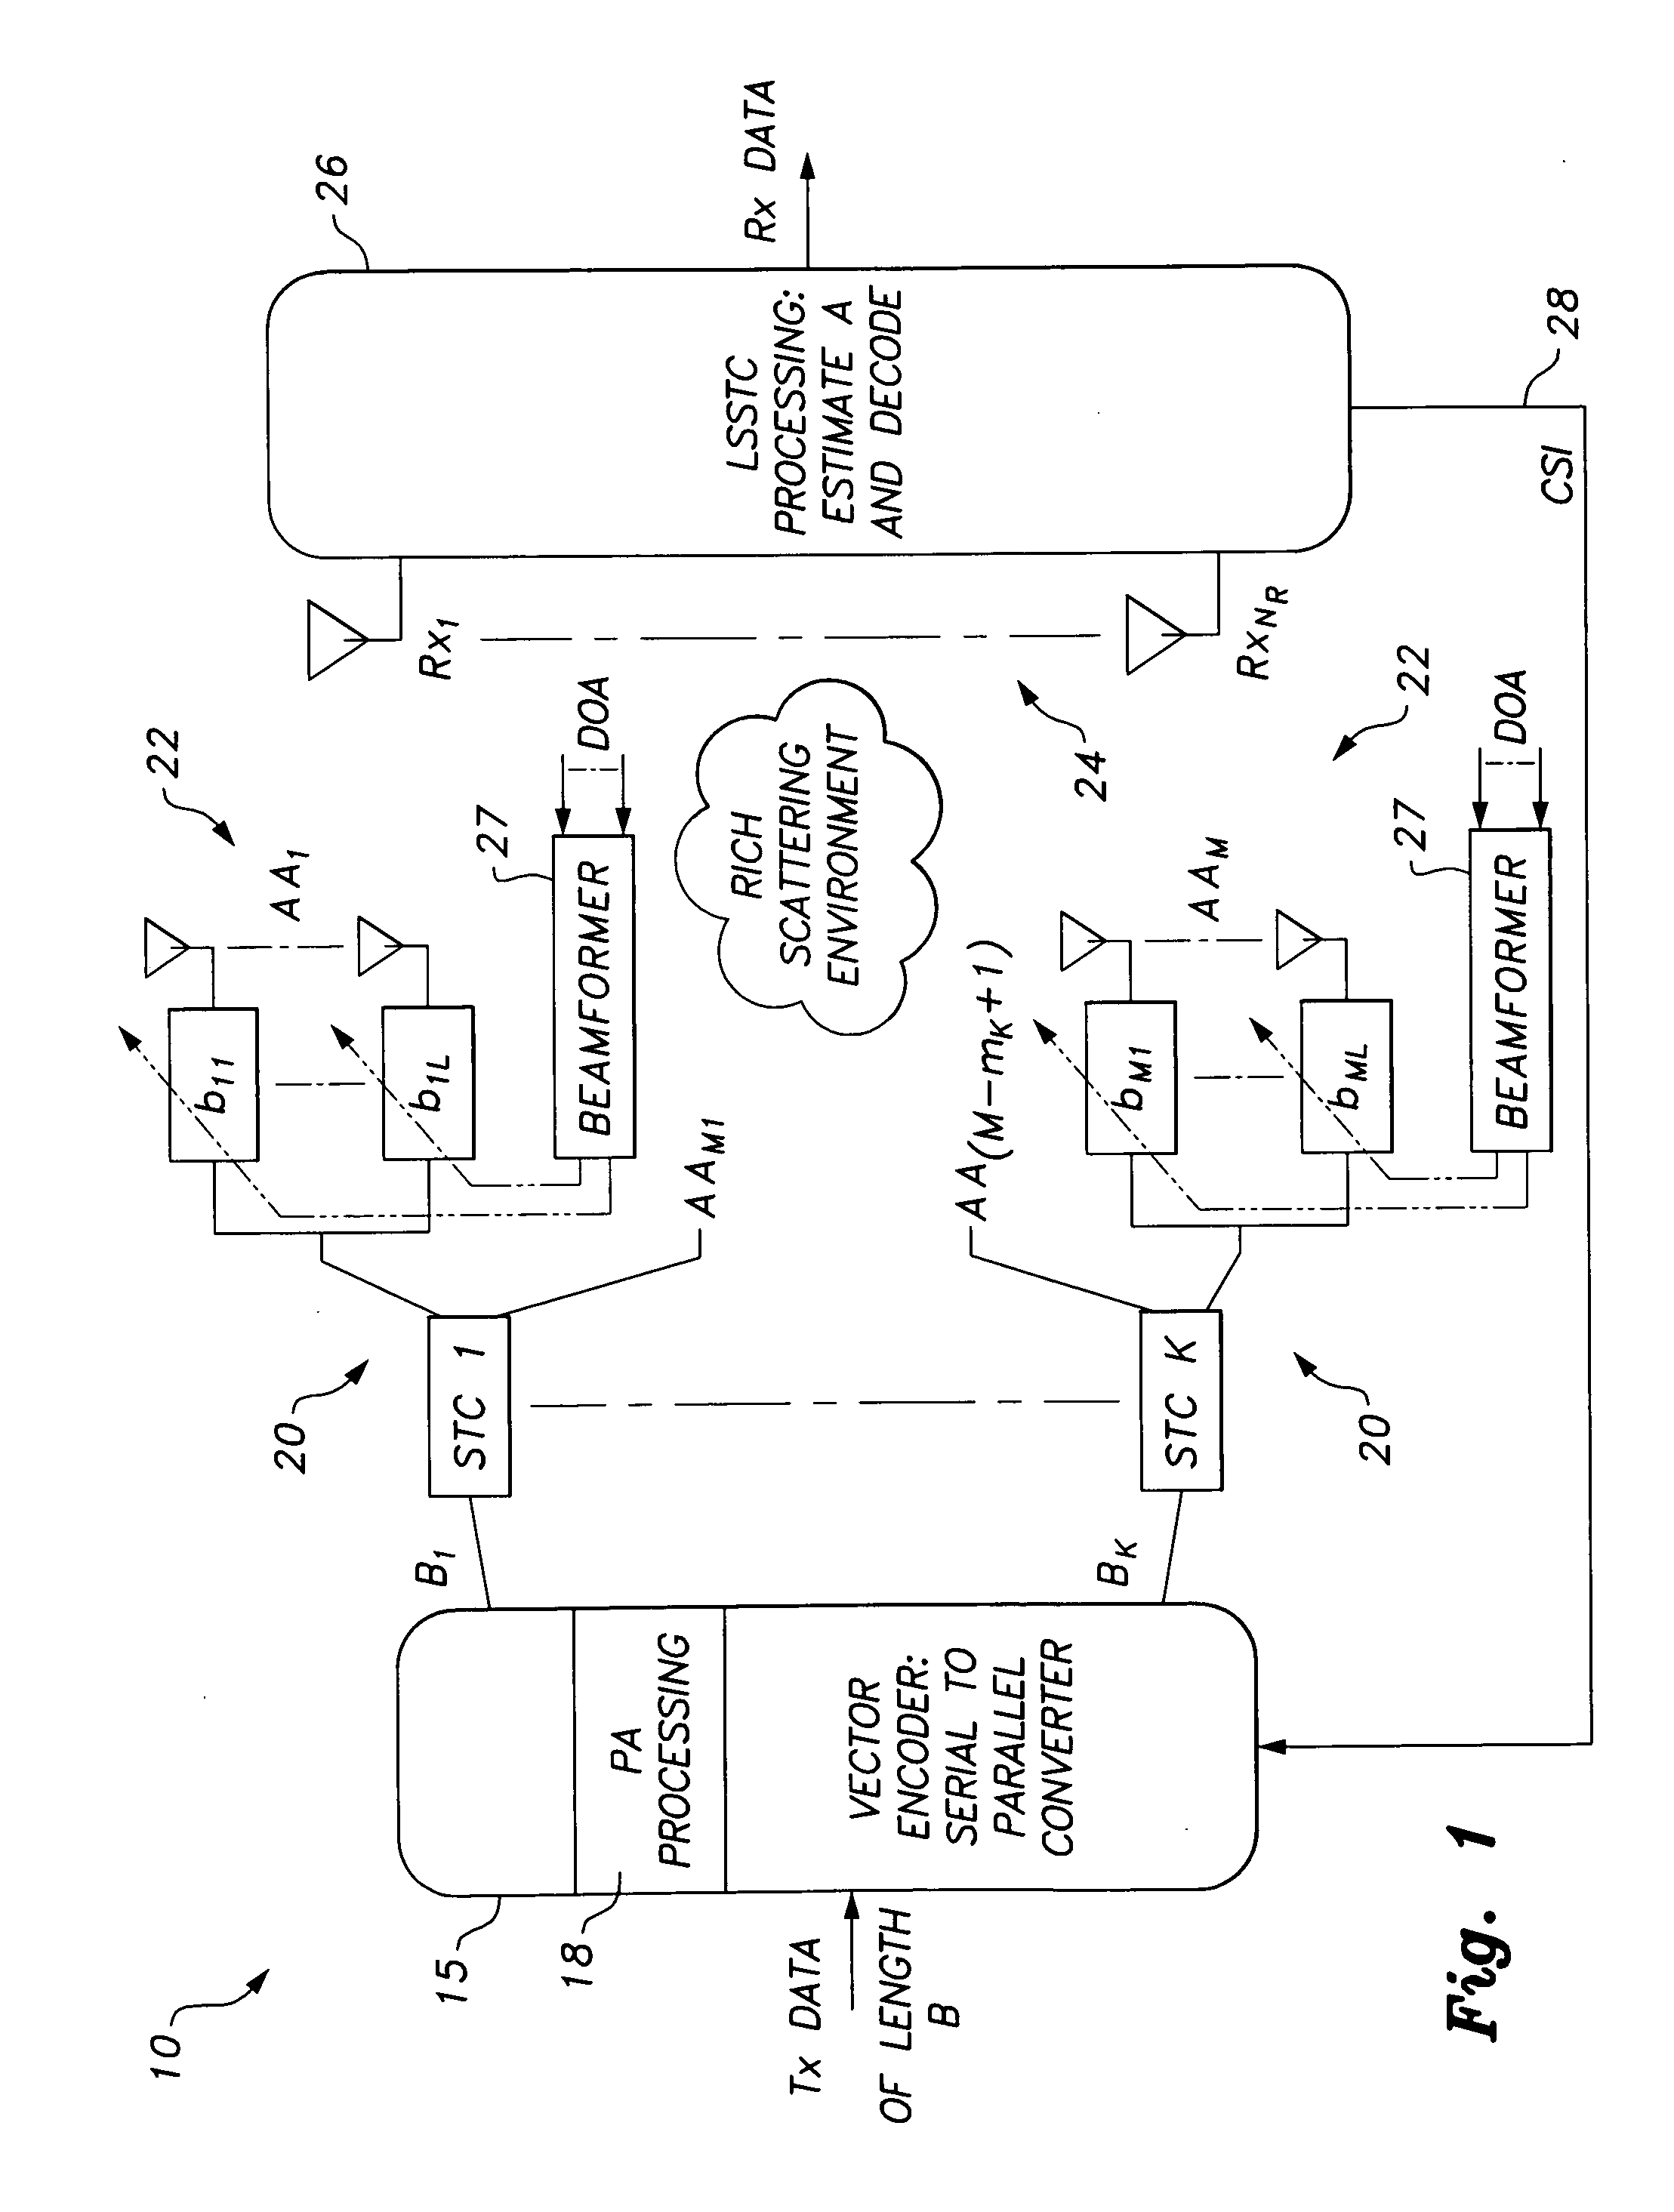 Multi-configuration adaptive layered steered space-time coded system and method